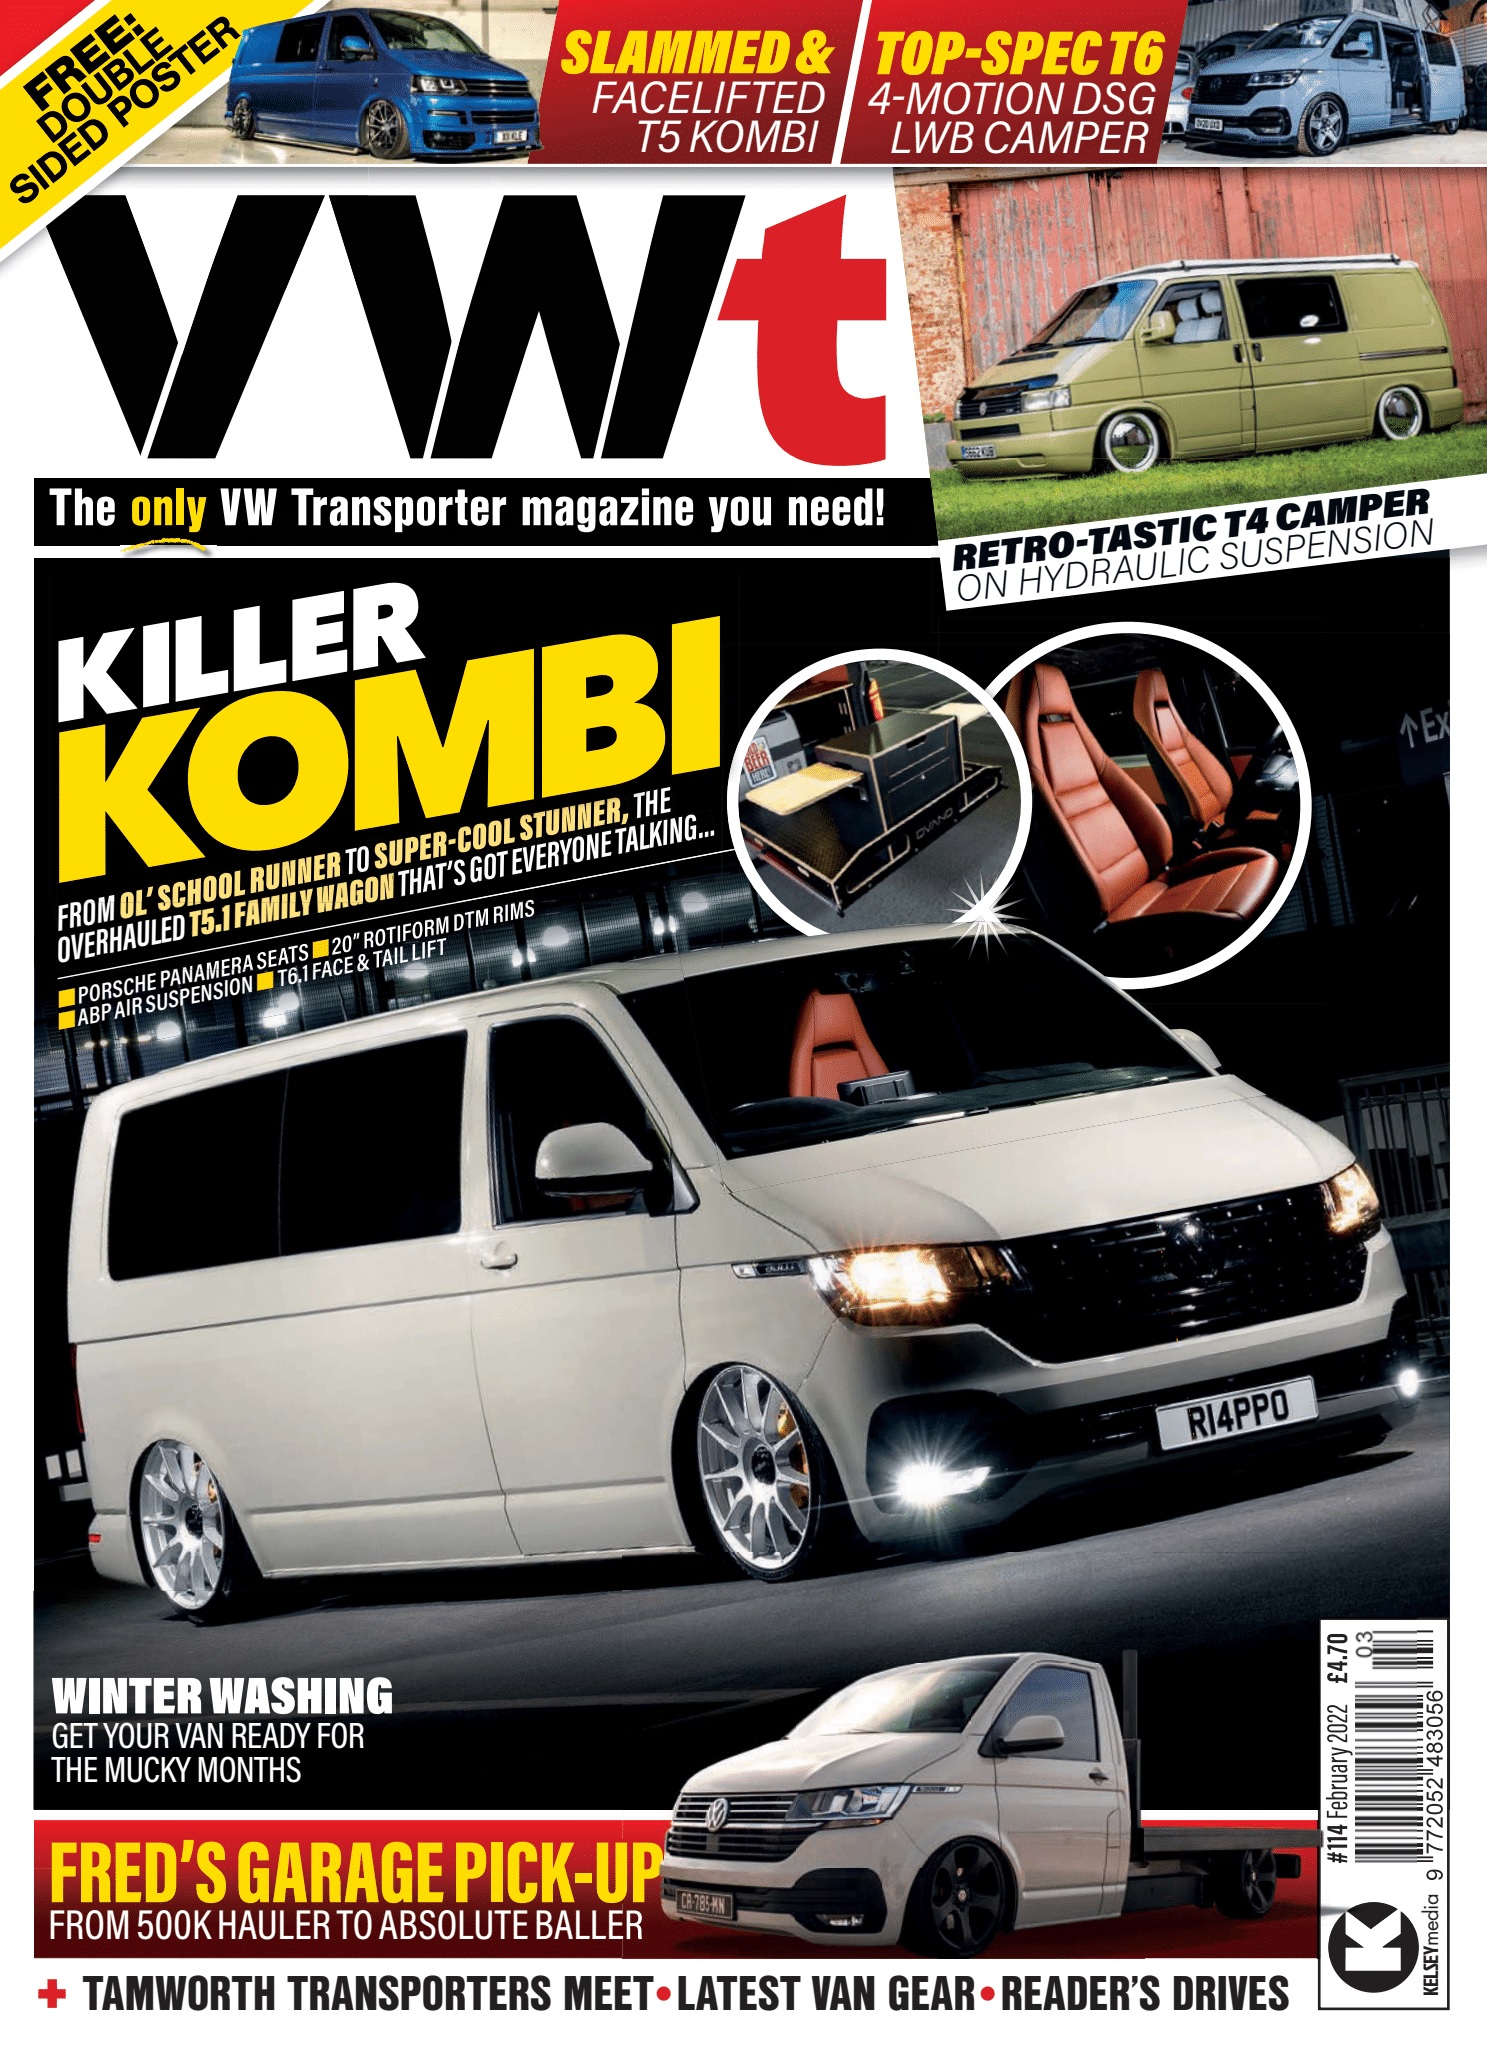 VWt Issue 114 February 22